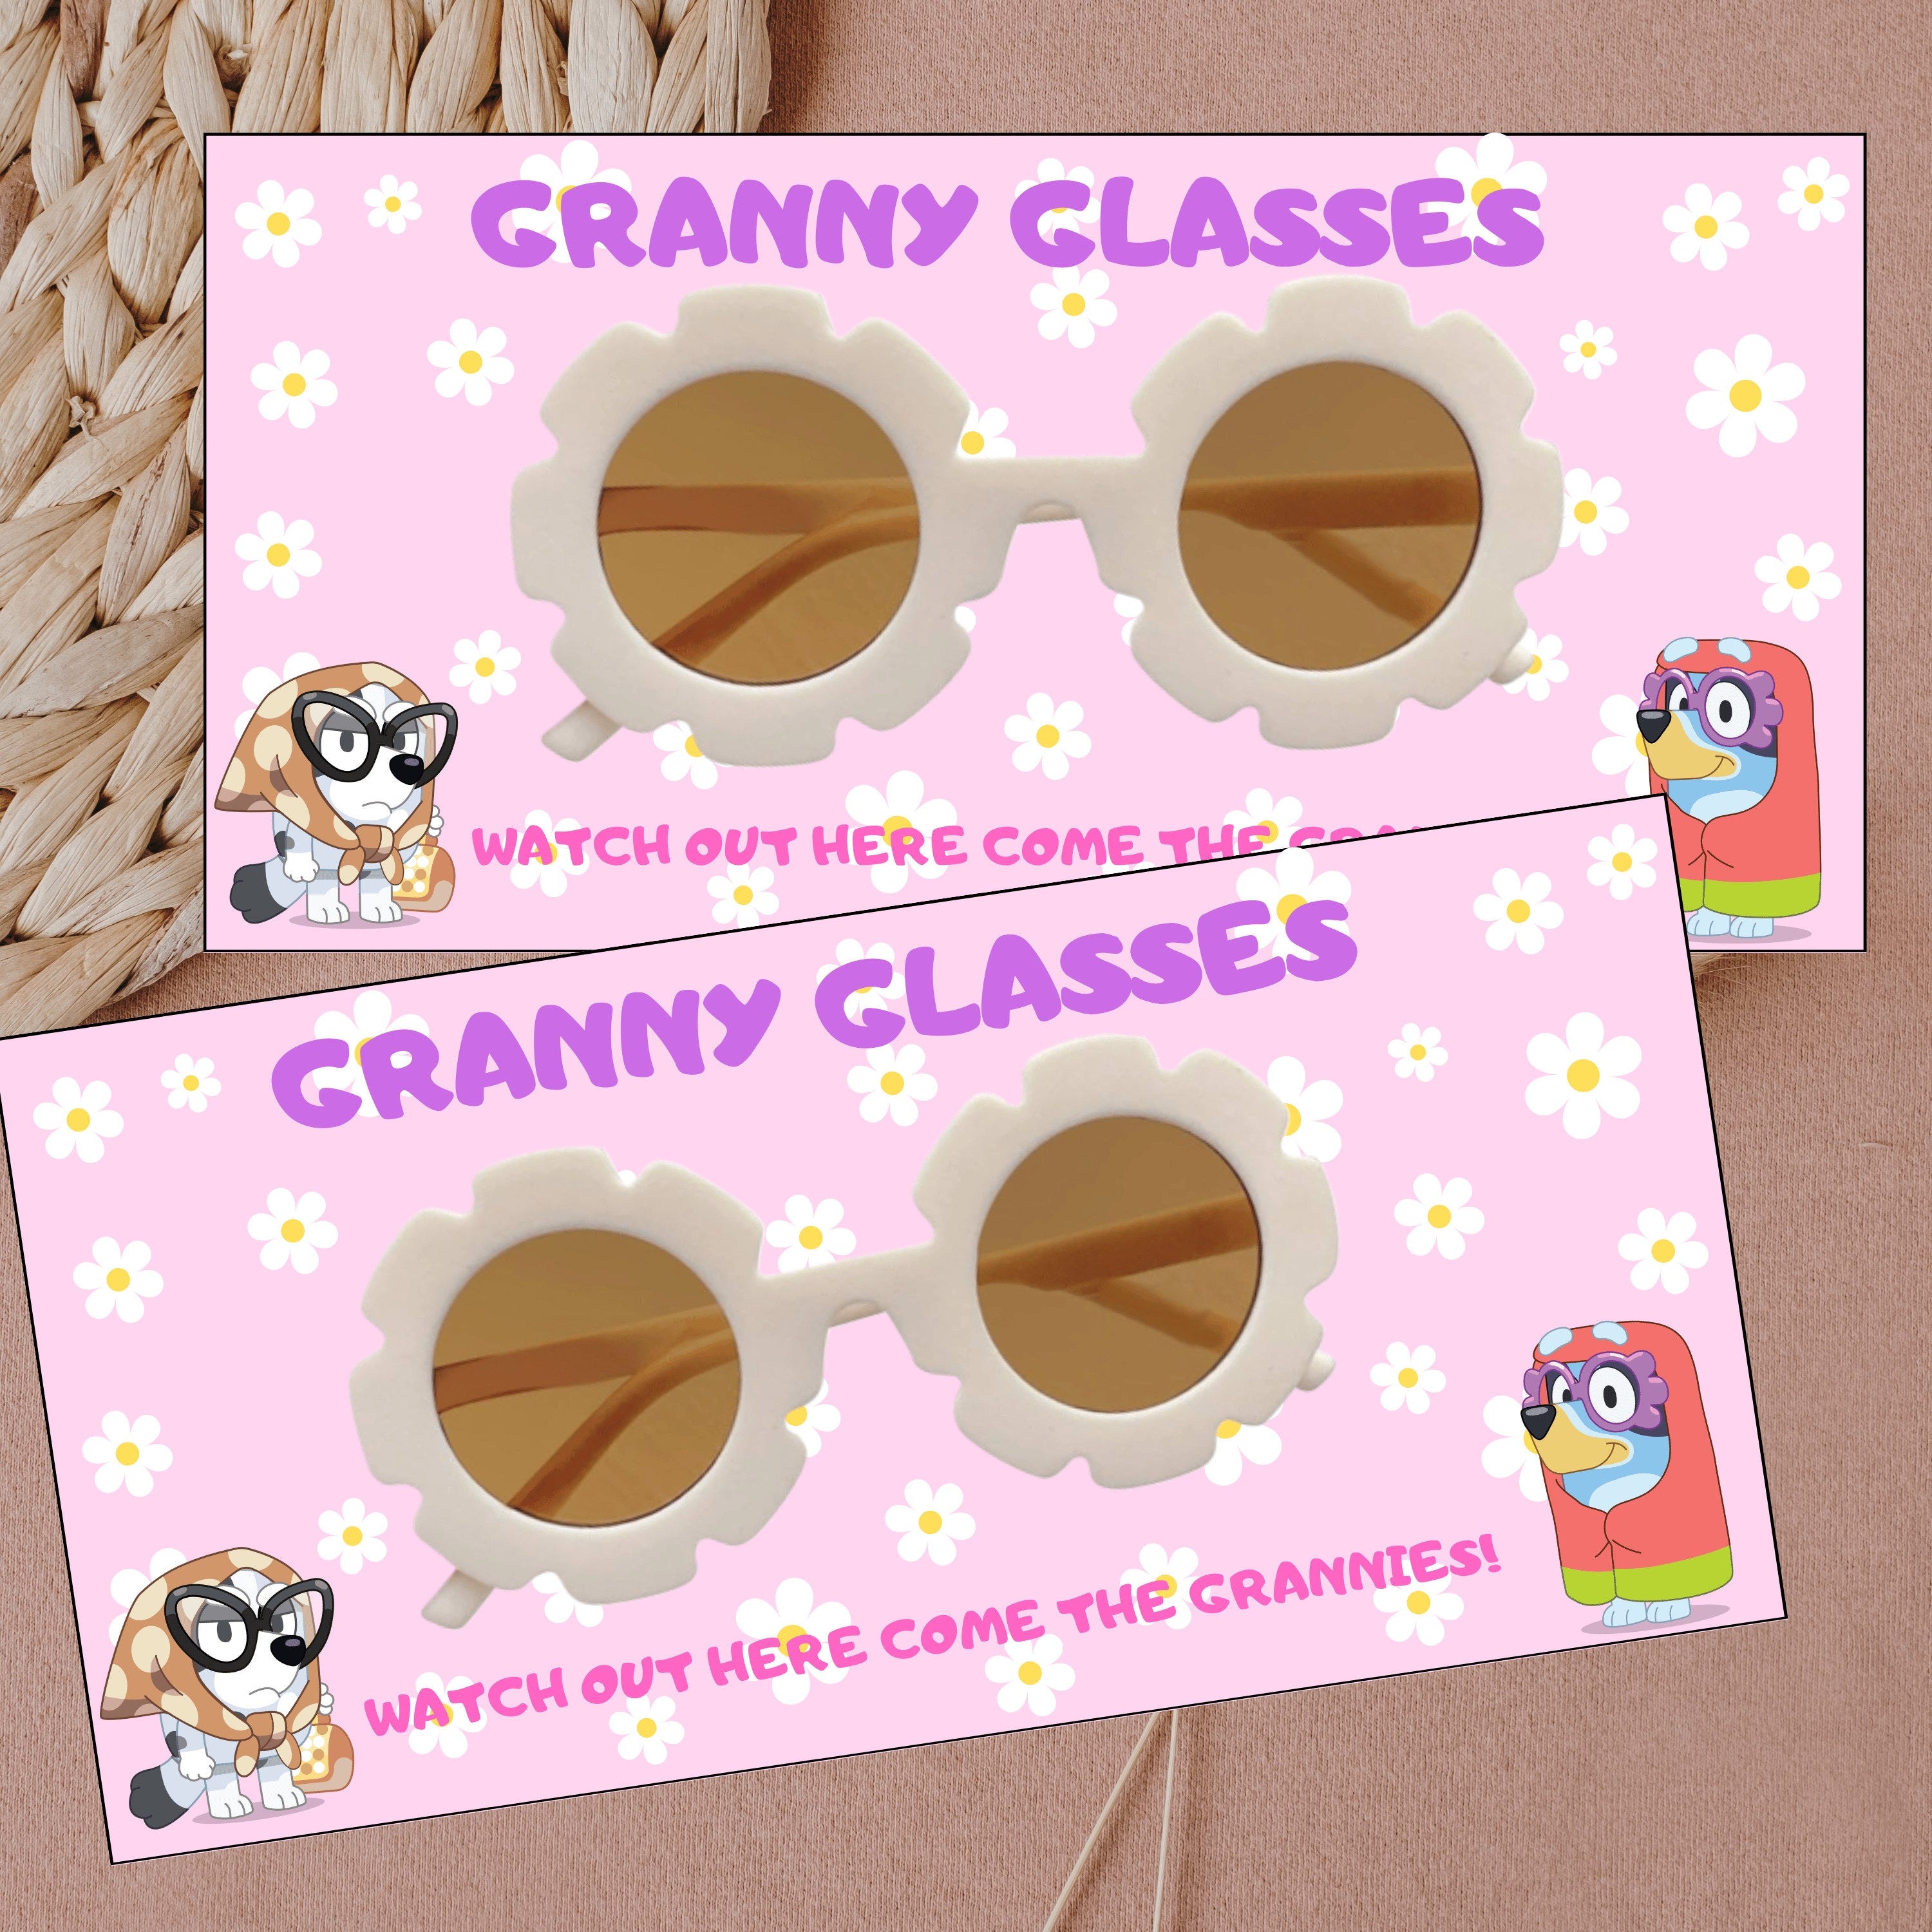 Granny Glasses Bluey Party Favors for Girl, Blue Dog Theme Girls Birthday Invite Card, Bluey and Bingo Pink Birthday Party Decor, DIY Party